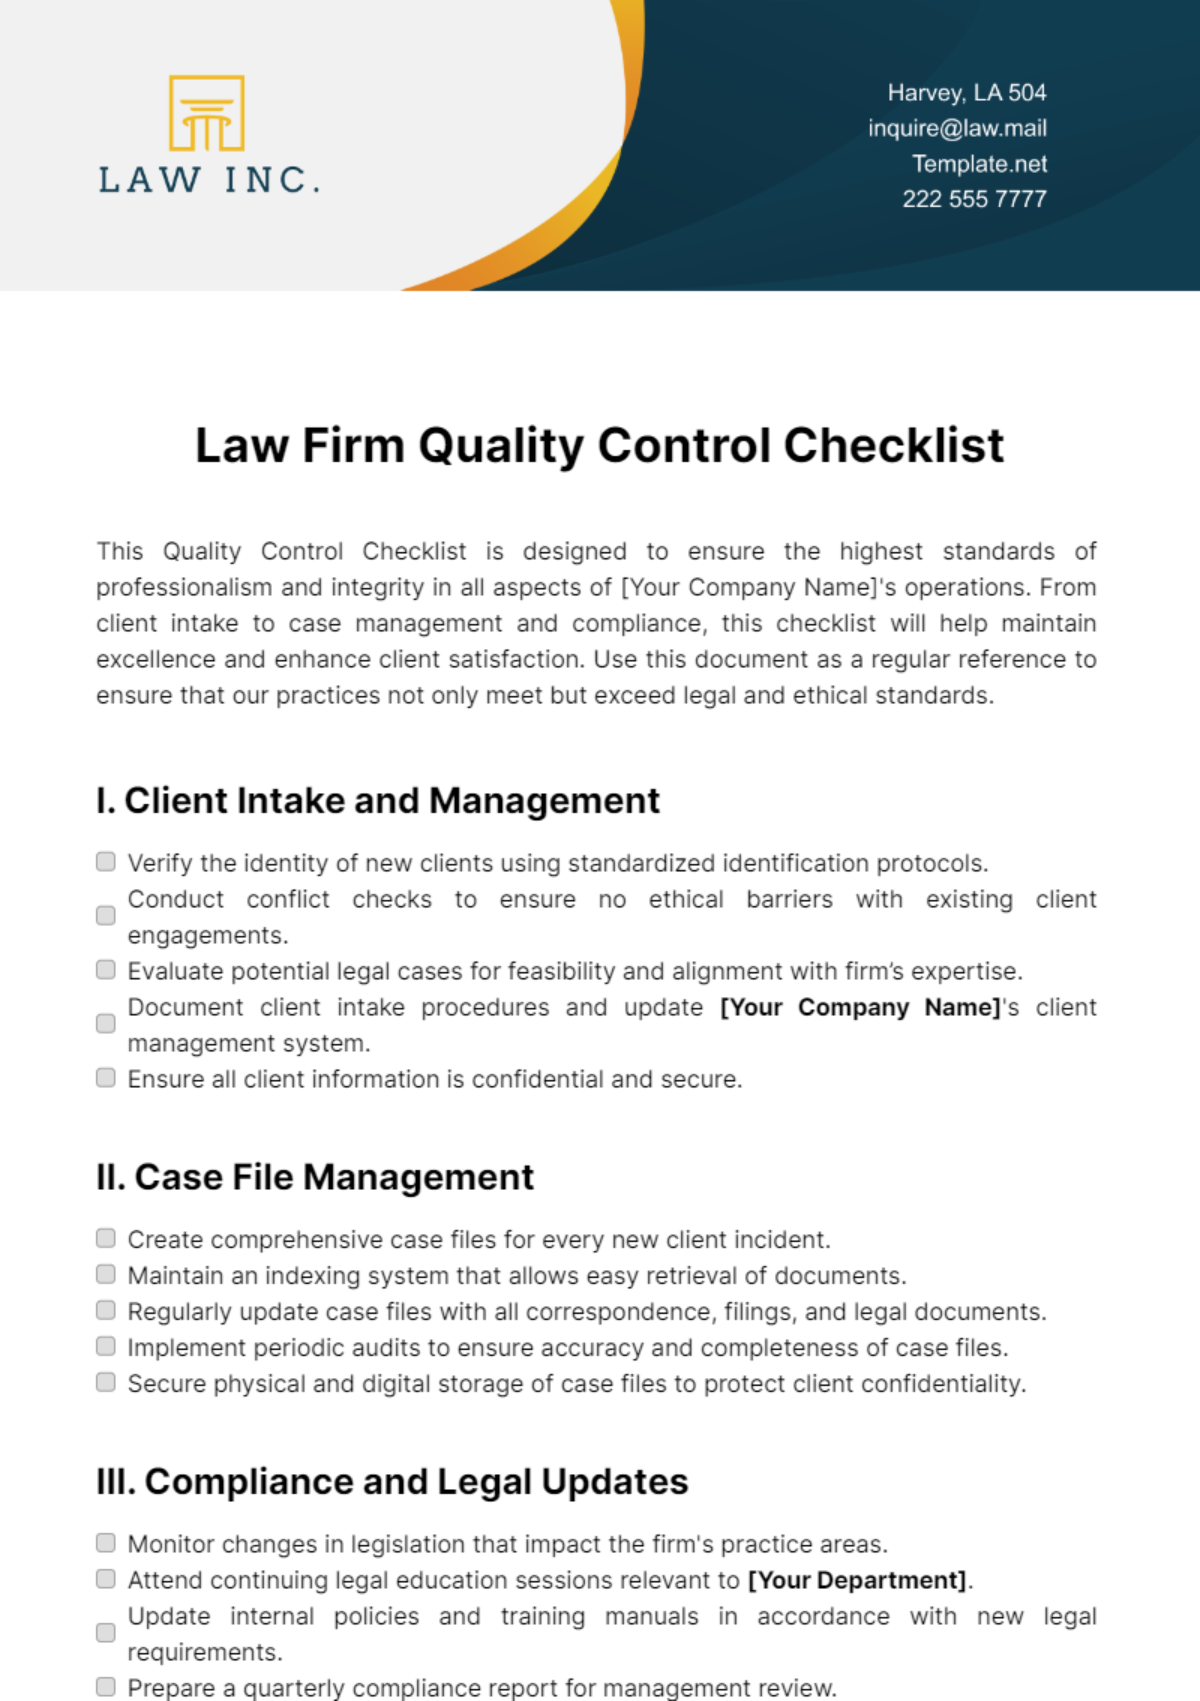 Law Firm Quality Control Checklist Template